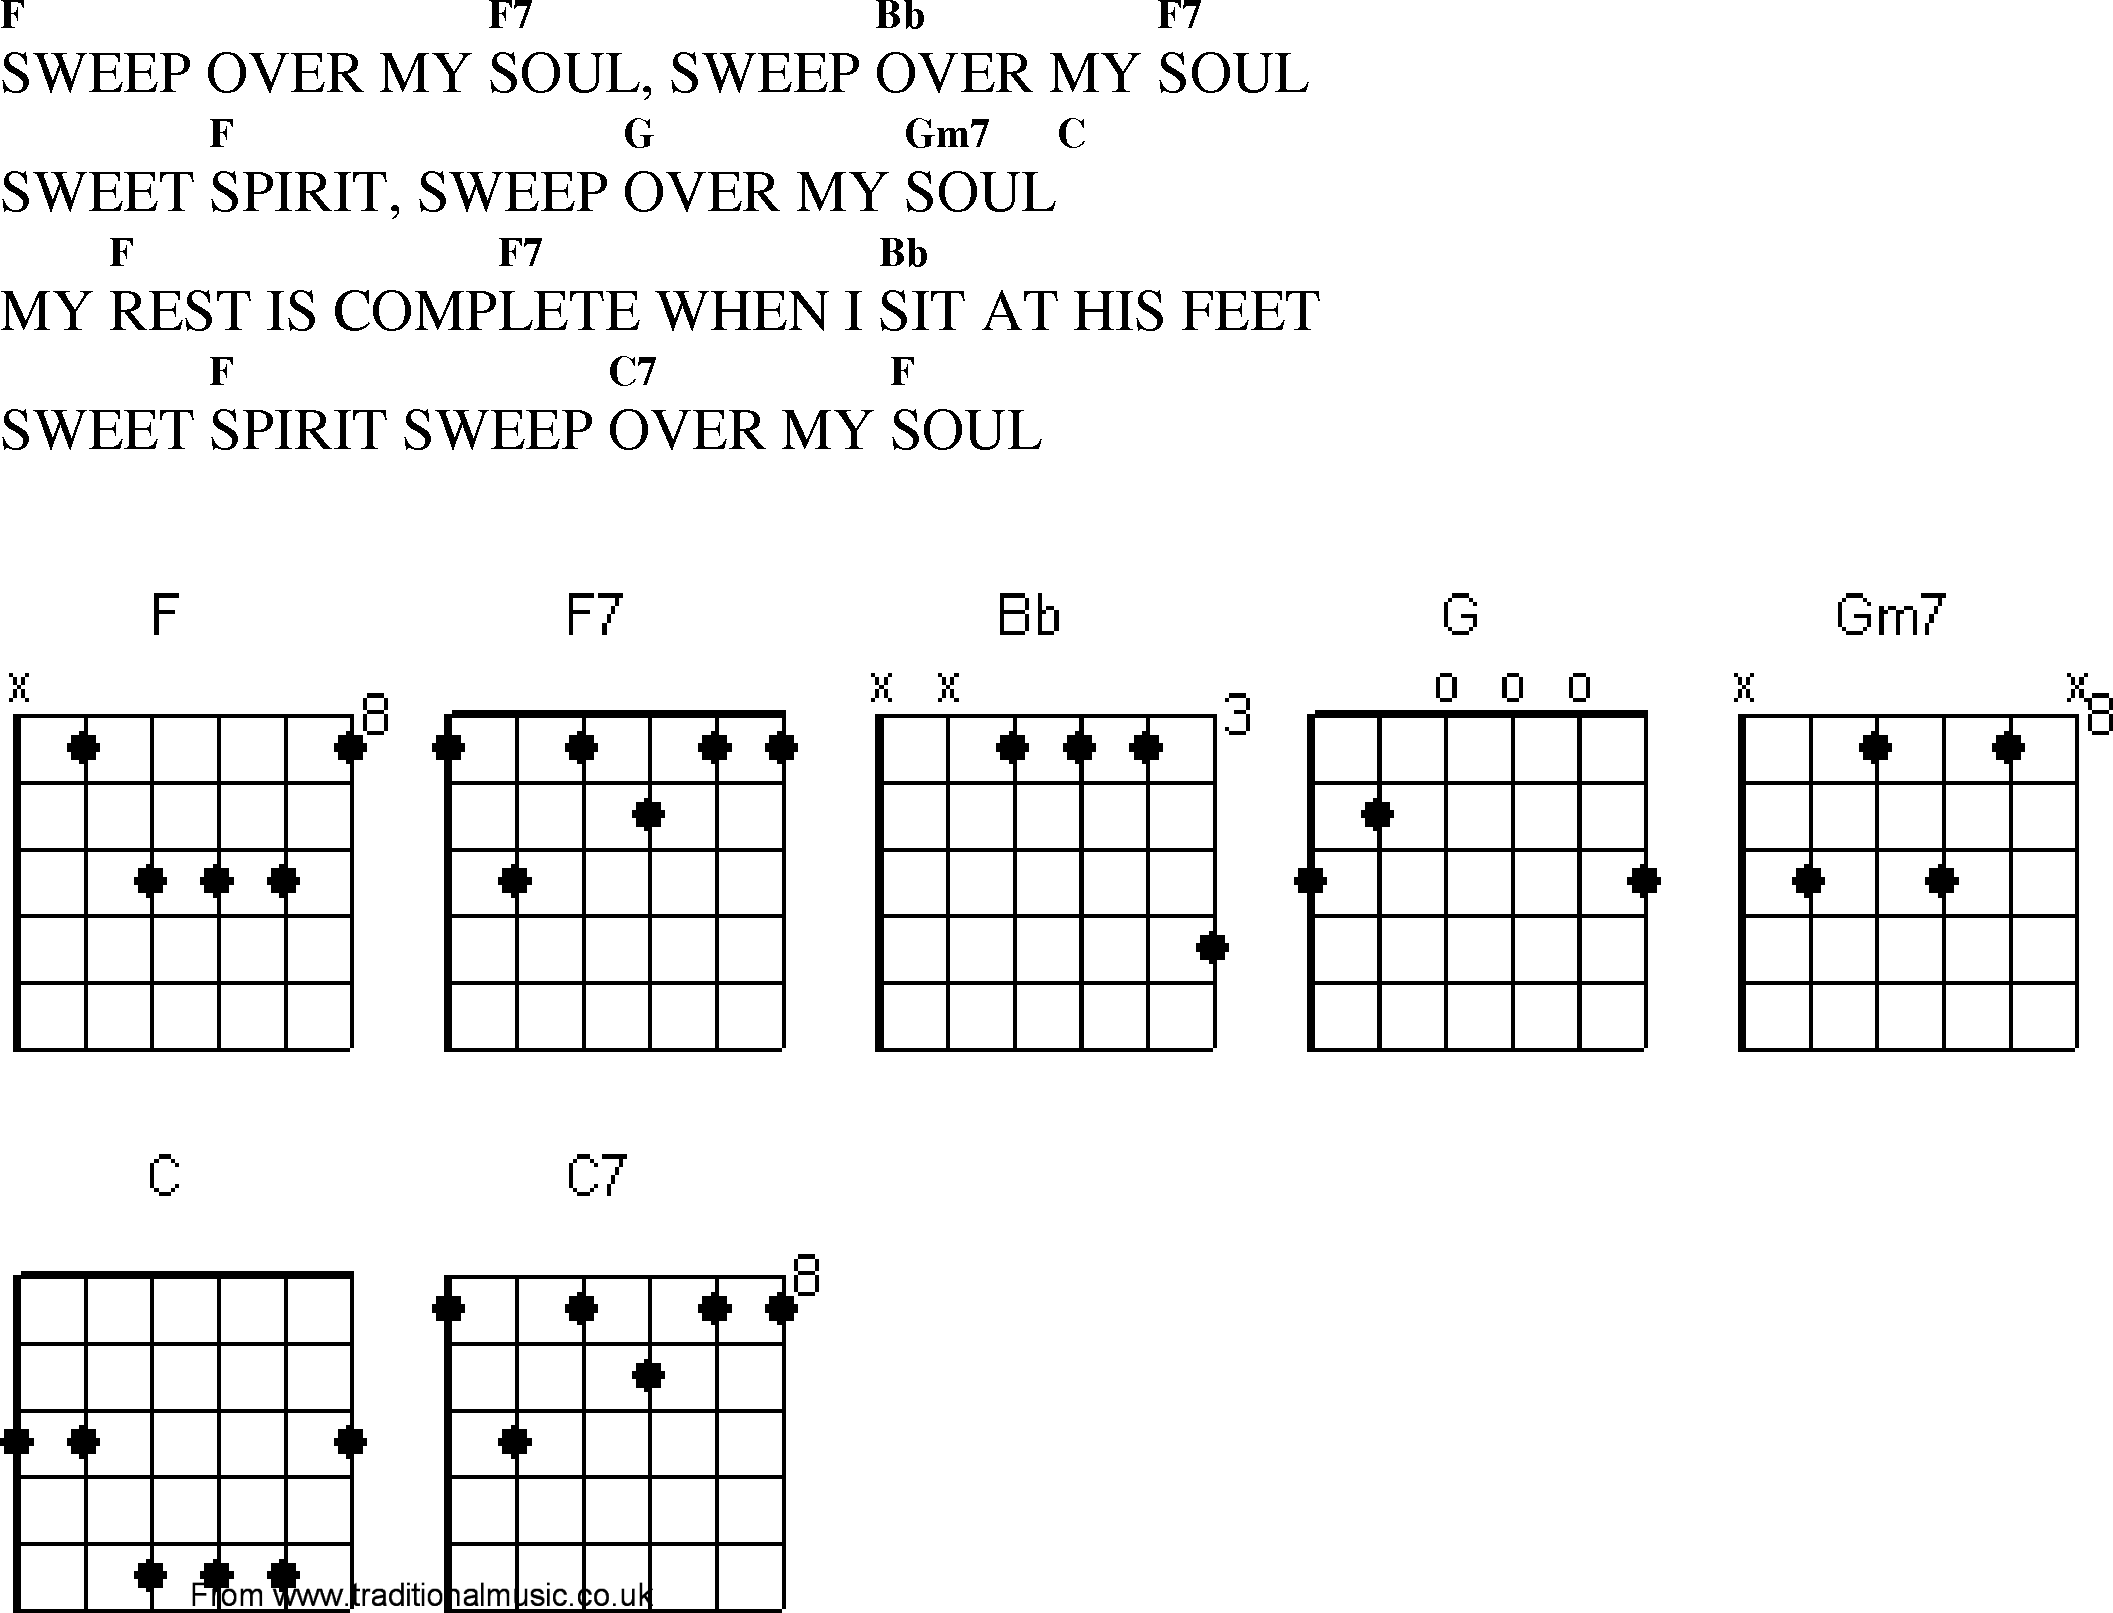 Gospel Song: sweep_over_my_soul, lyrics and chords.